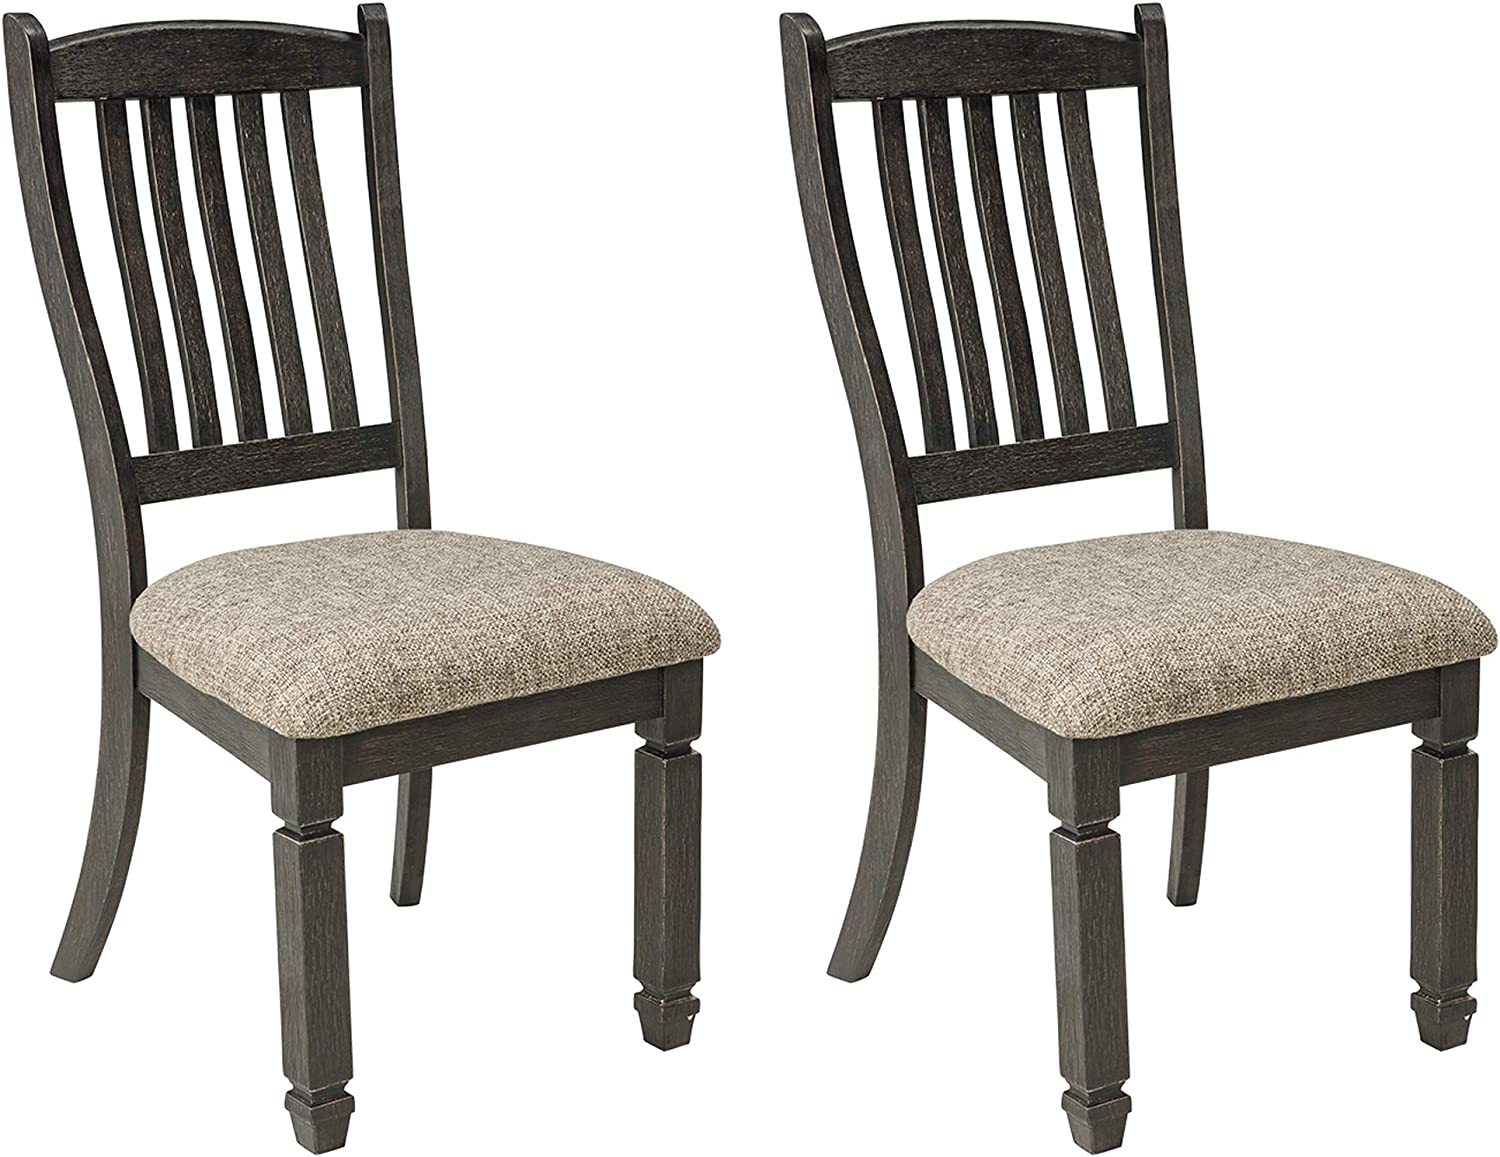 Signature Design by Ashley Tyler Creek Dining Room Upholstered Chair, Set of 2, - $210.99